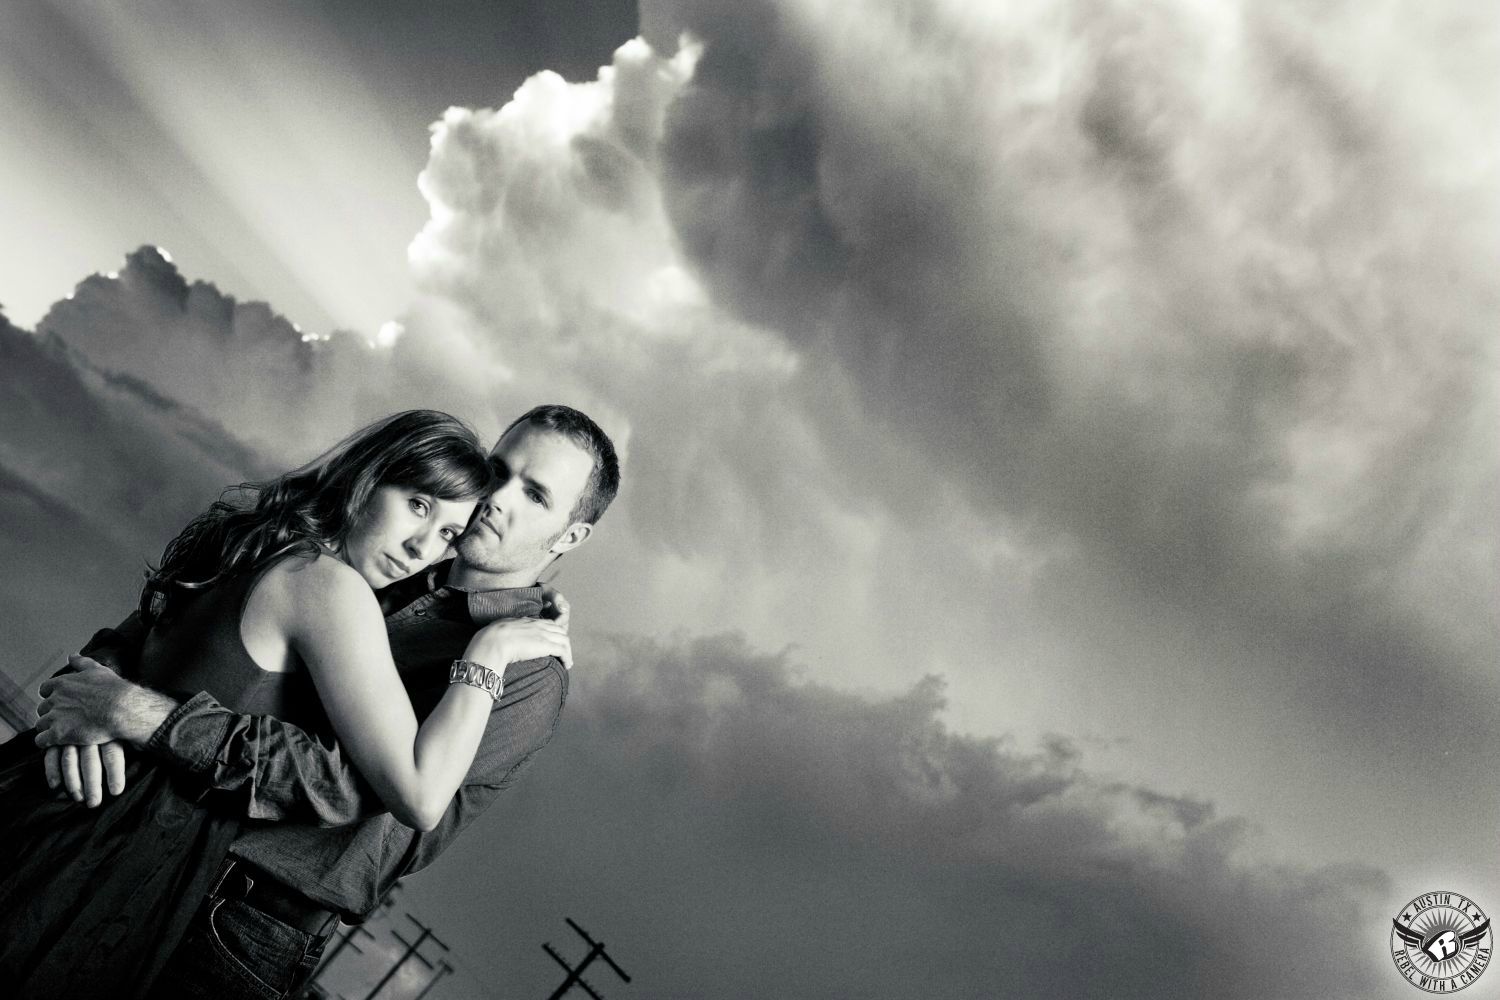 male and female couple wearing trendy clothes  embrace and she has curly dark hair in dark dress and he has short dark hair with a dark button up shirt in front of dramatic ominous clouds with rays of sunshine coming from behind the cloud  